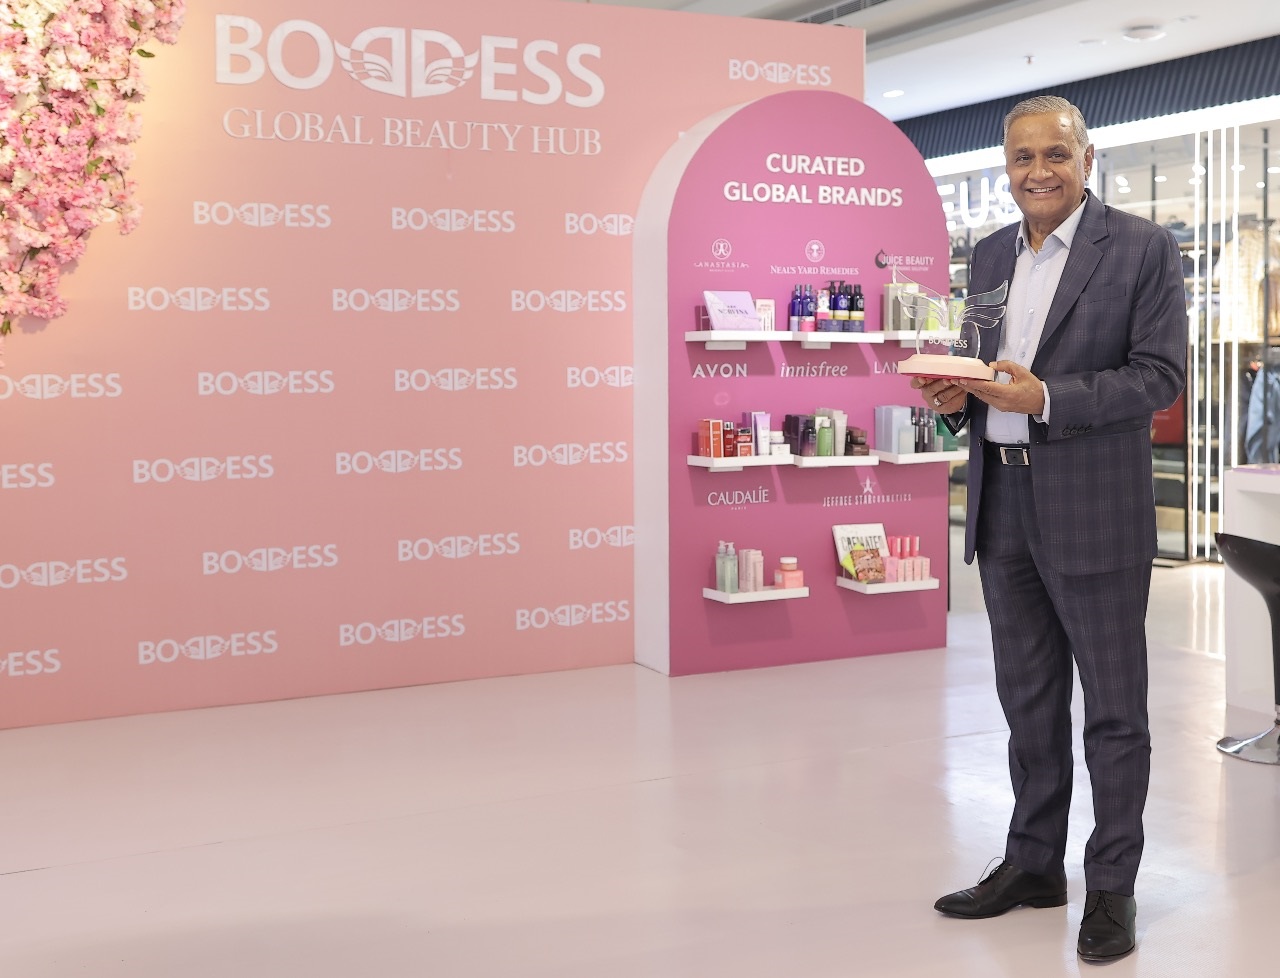 Boddess Beauty launches its first experiential store in Jaipur